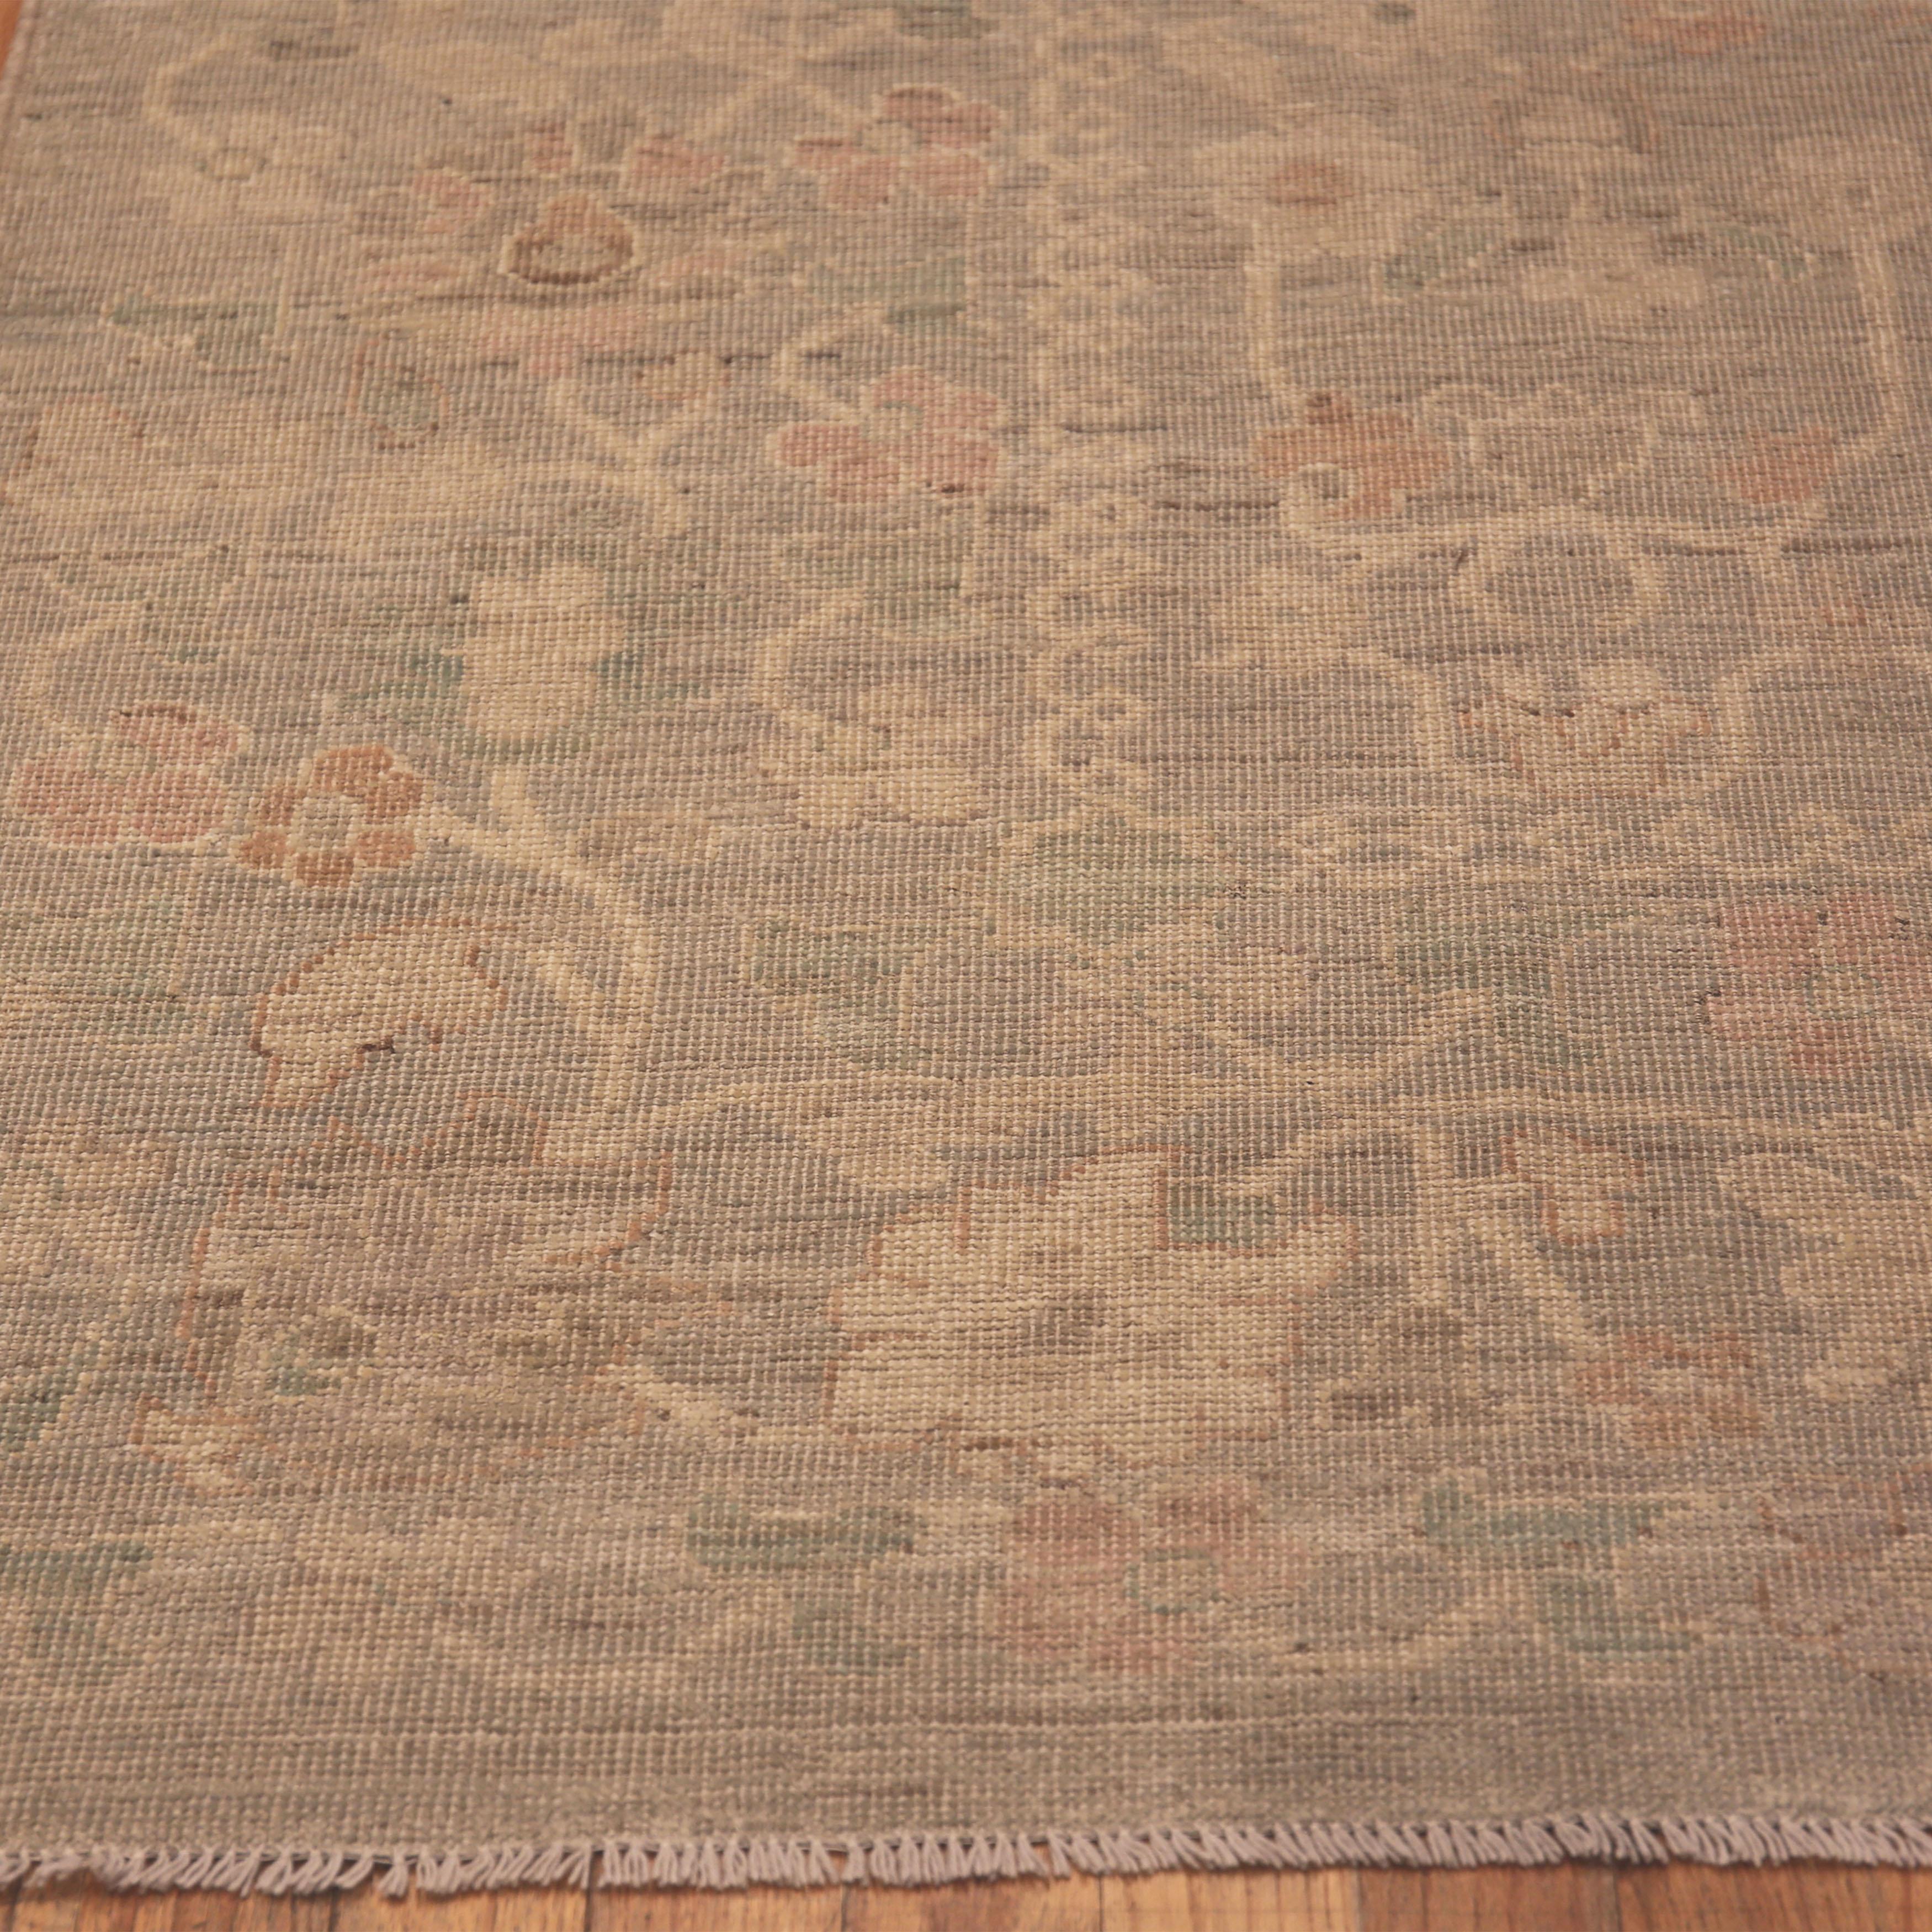 Masterful craftsmanship and strong antique quality make this Zameen Mid Century Modern Rug 9' x 11'9